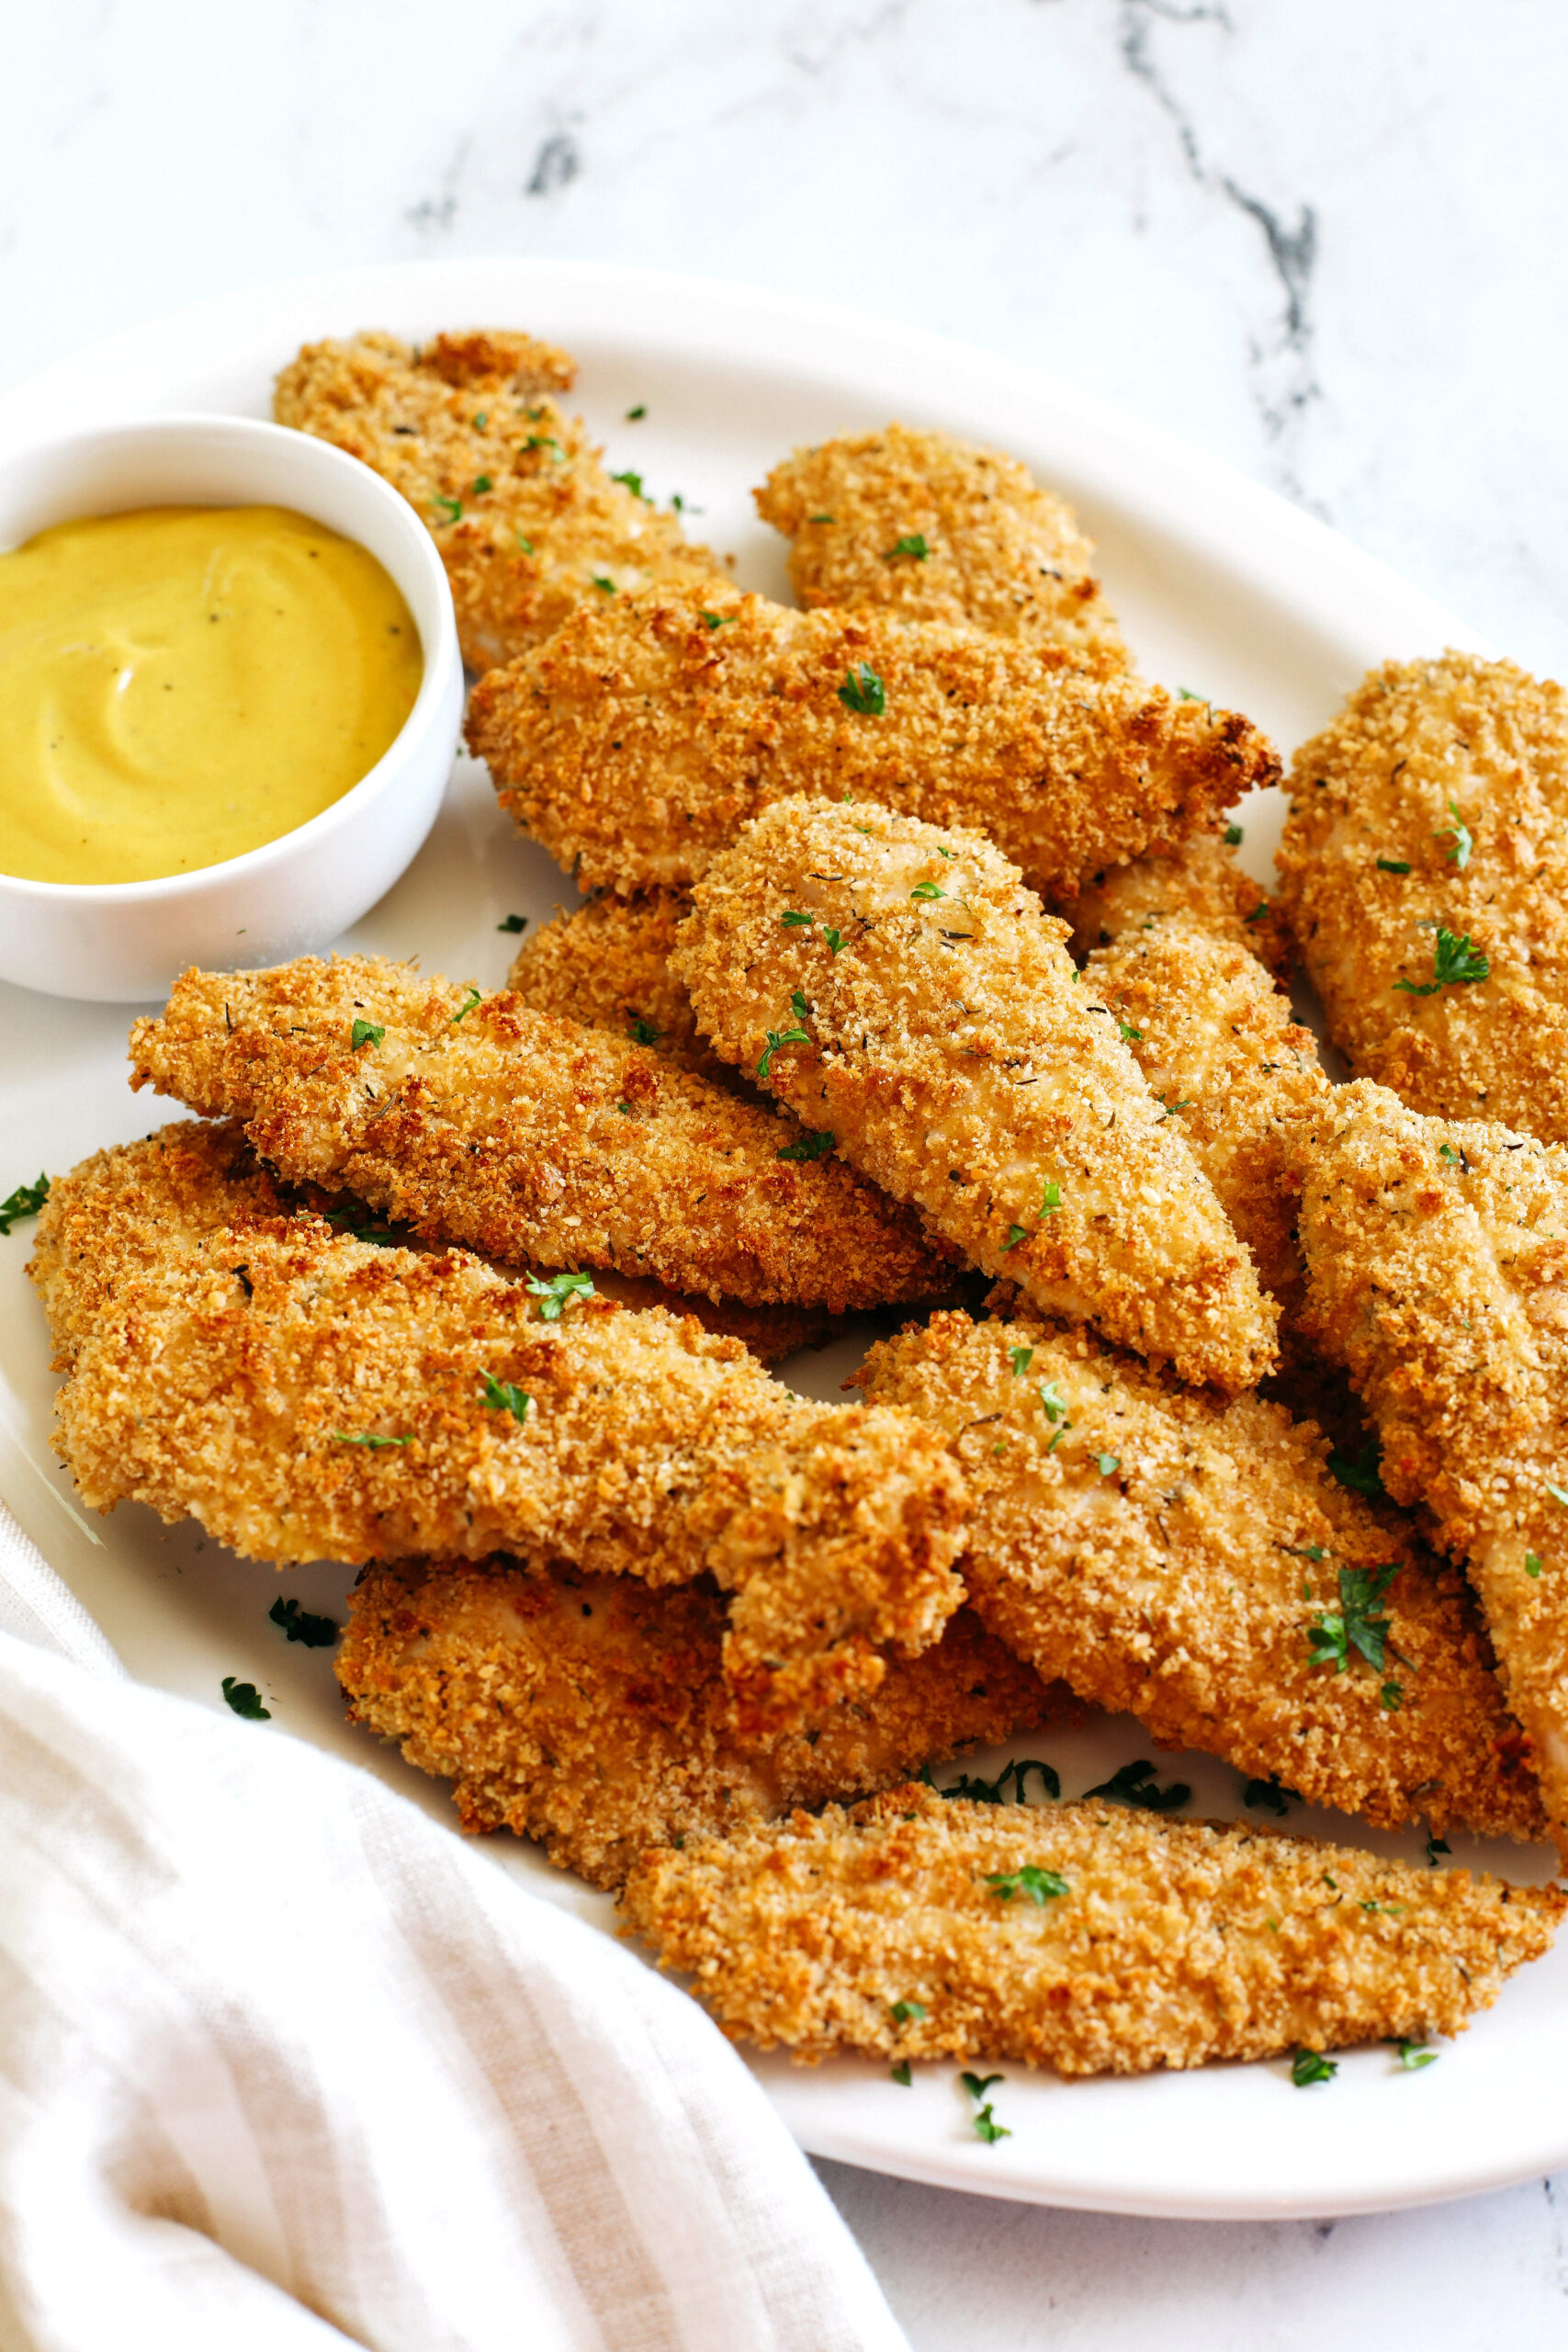 Easy Baked Chicken Tenders that are perfectly crispy, full of flavor and easily made in just 20 minutes!  So delicious served with your favorite dipping sauce!